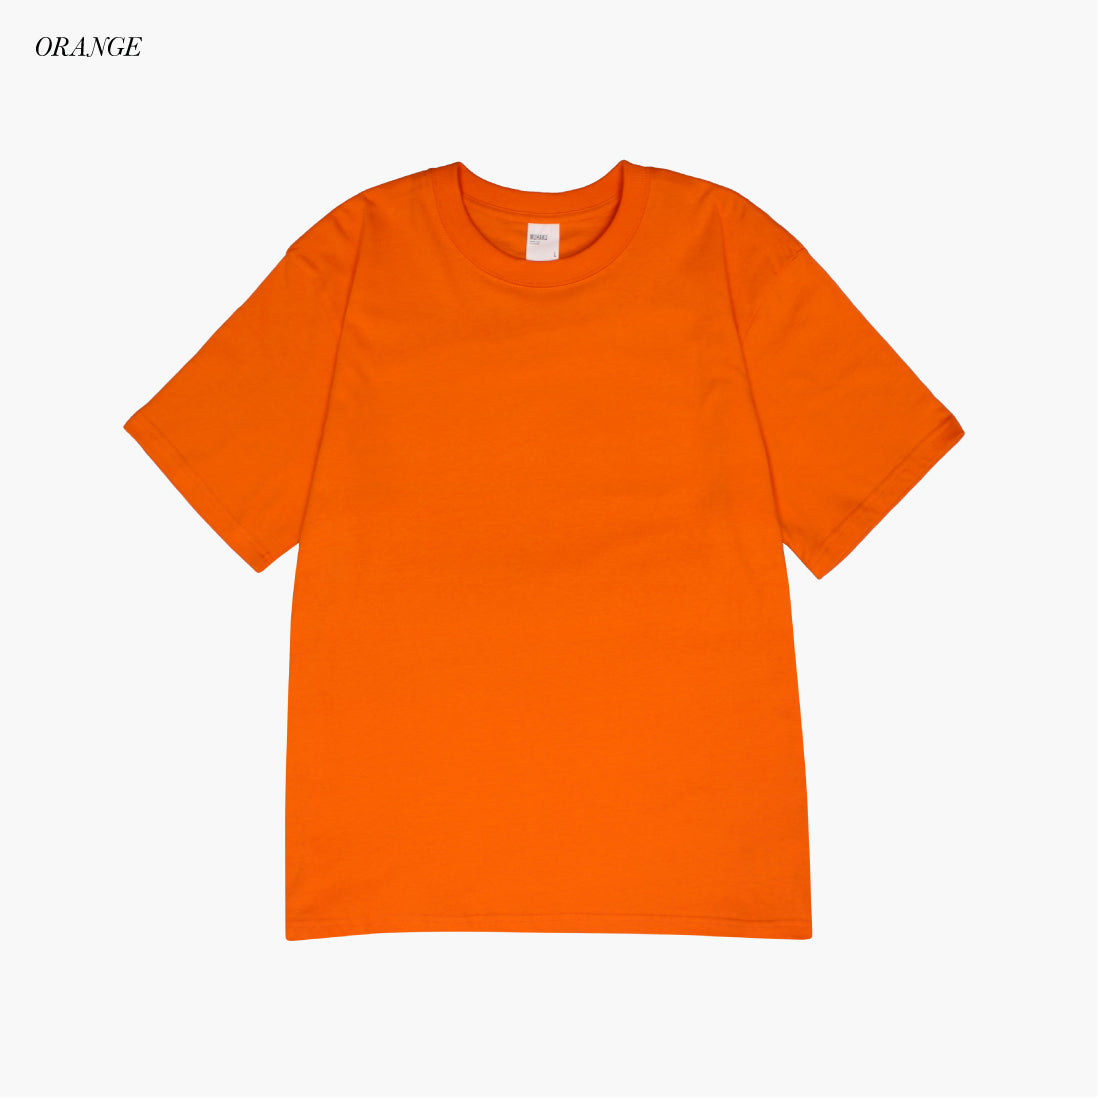 JUST RIGHT SS TEE 6.8oz